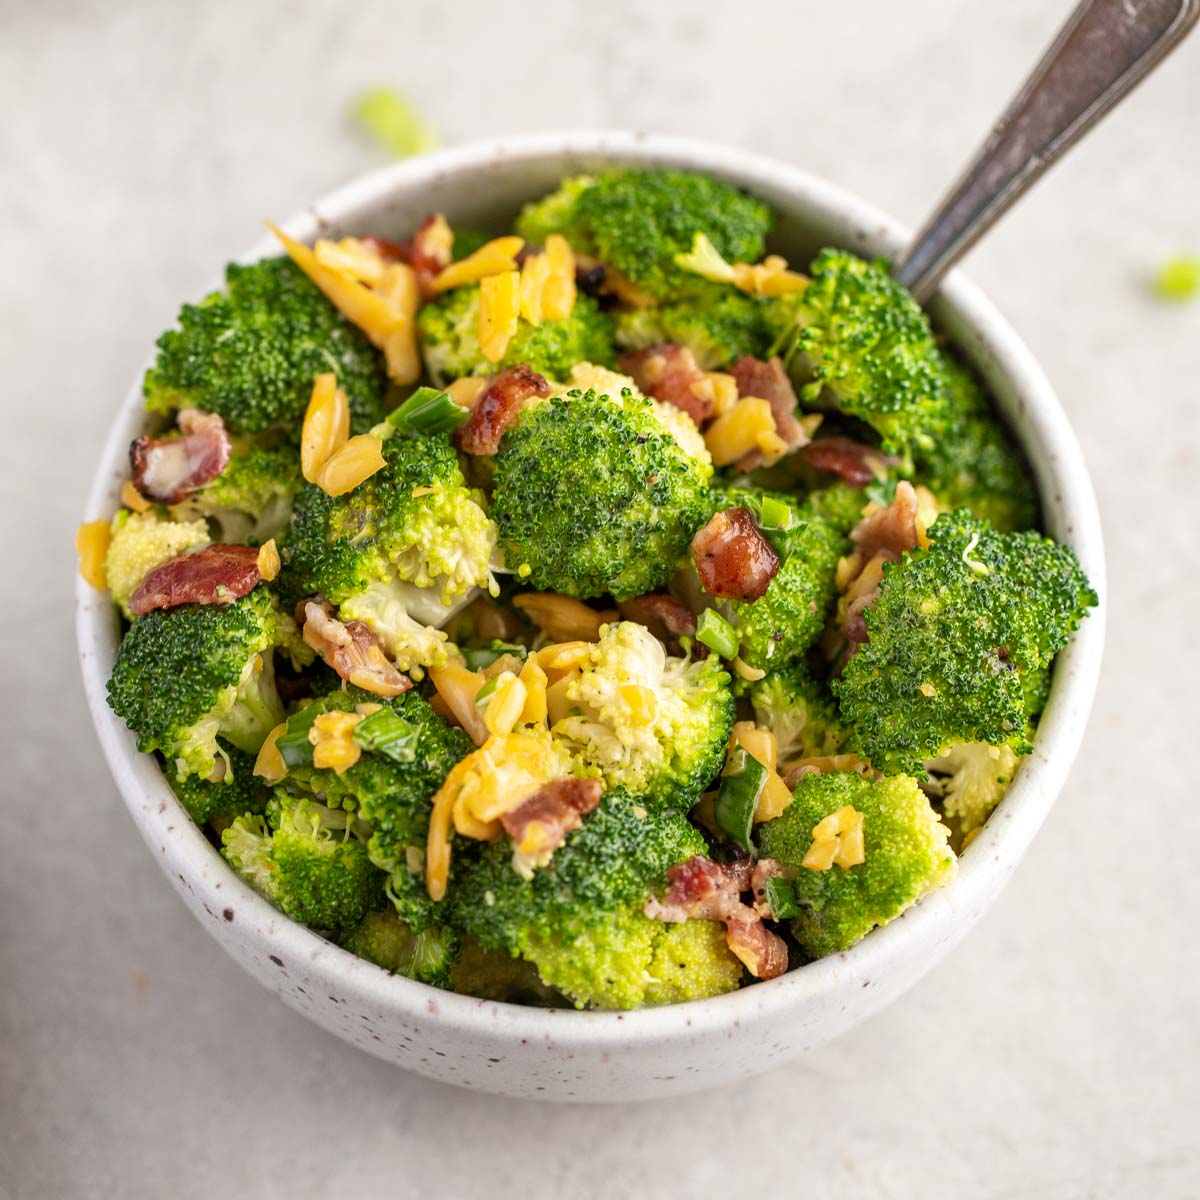 Broccoli salad in a speckled white bowl.